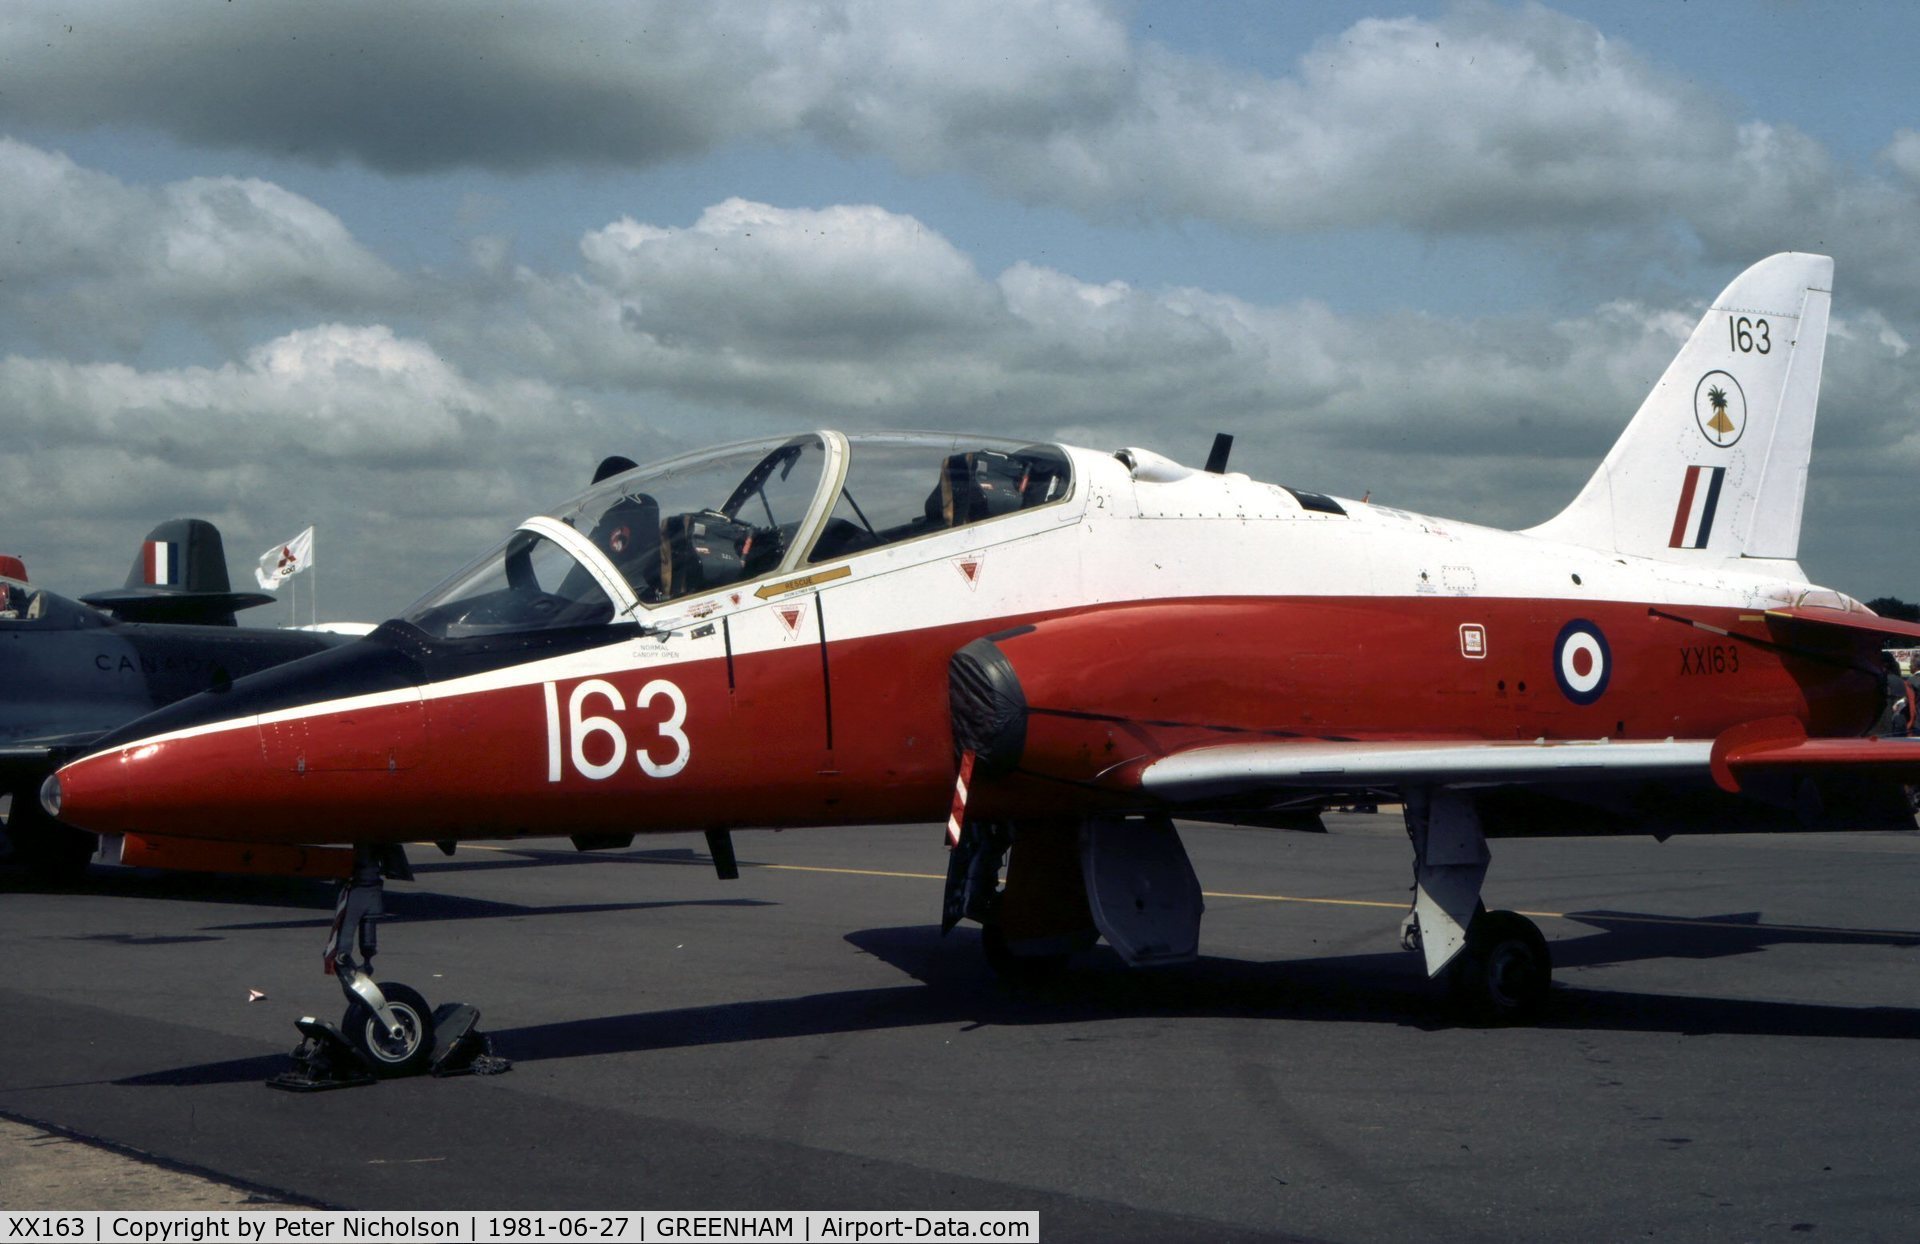 XX163, 1976 Hawker Siddeley Hawk T.1 C/N 010/312010, Another view of the 4 Flying Training School Hawk on display at the 1981 Intnl Air Tattoo at RAF Greenham Common.